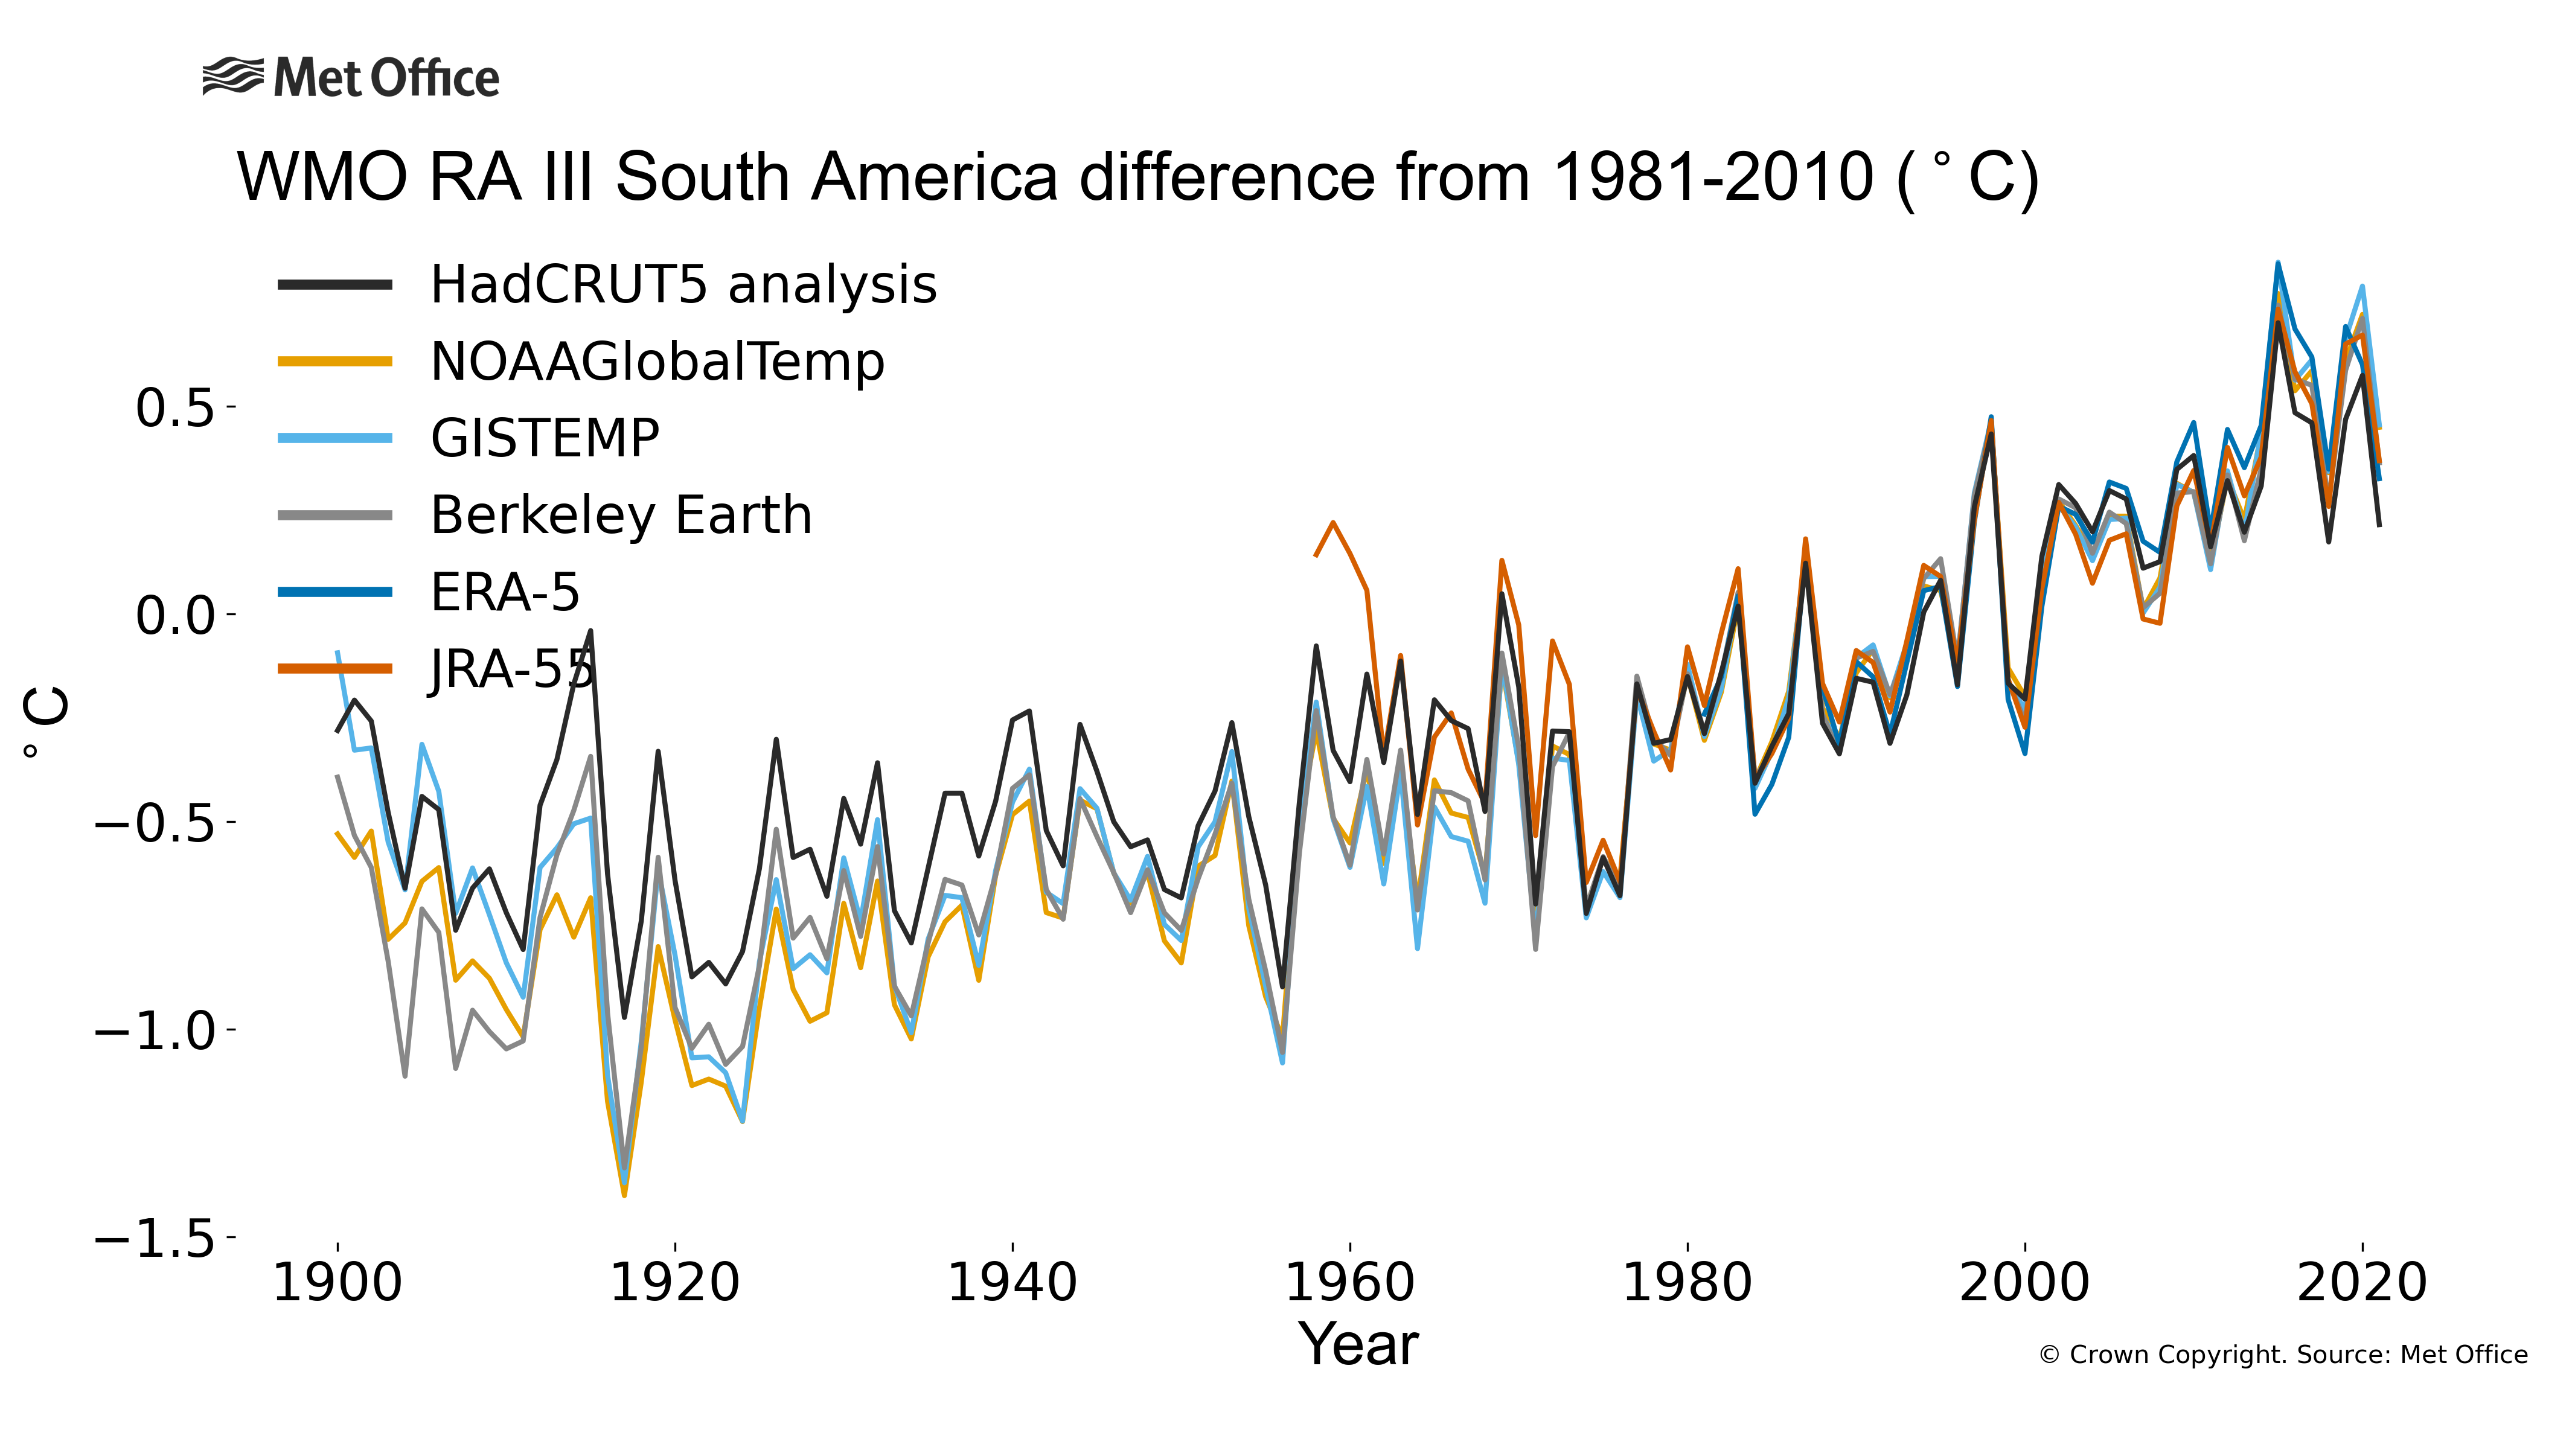 
The plot shows annual average temperature anomalies (relative to 1981-2010) for WMO RA III - South America. Data are from six different data sets: HadCRUT5, NOAAGlobalTemp, GISTEMP, Berkeley Earth, ERA5 and JRA55.
